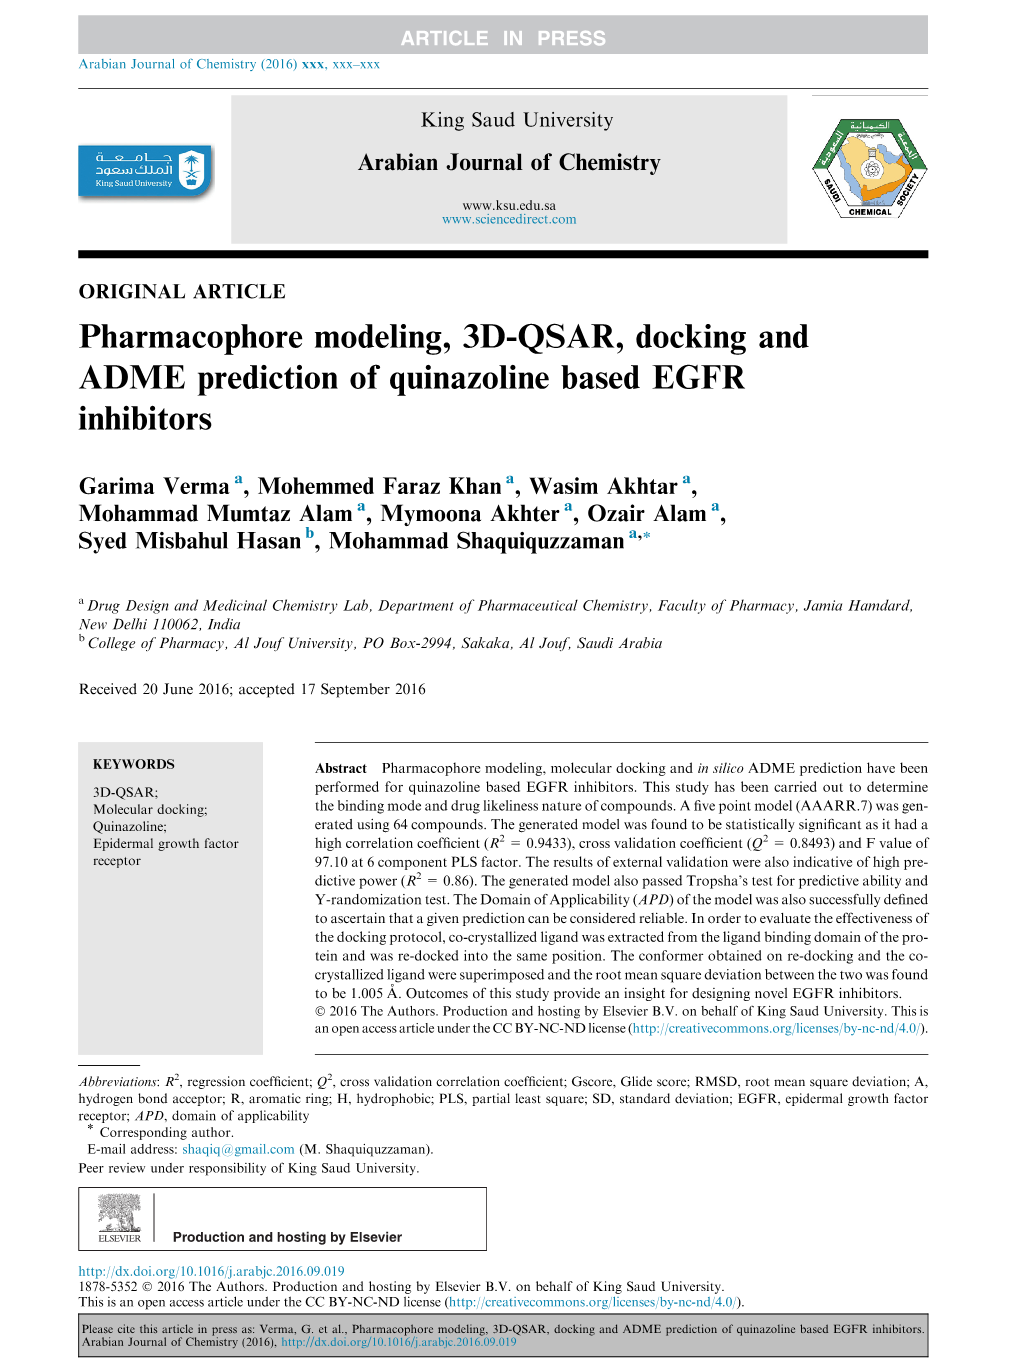 Pharmacophore Modeling, 3D-QSAR, Docking and ADME Prediction of Quinazoline Based EGFR Inhibitors